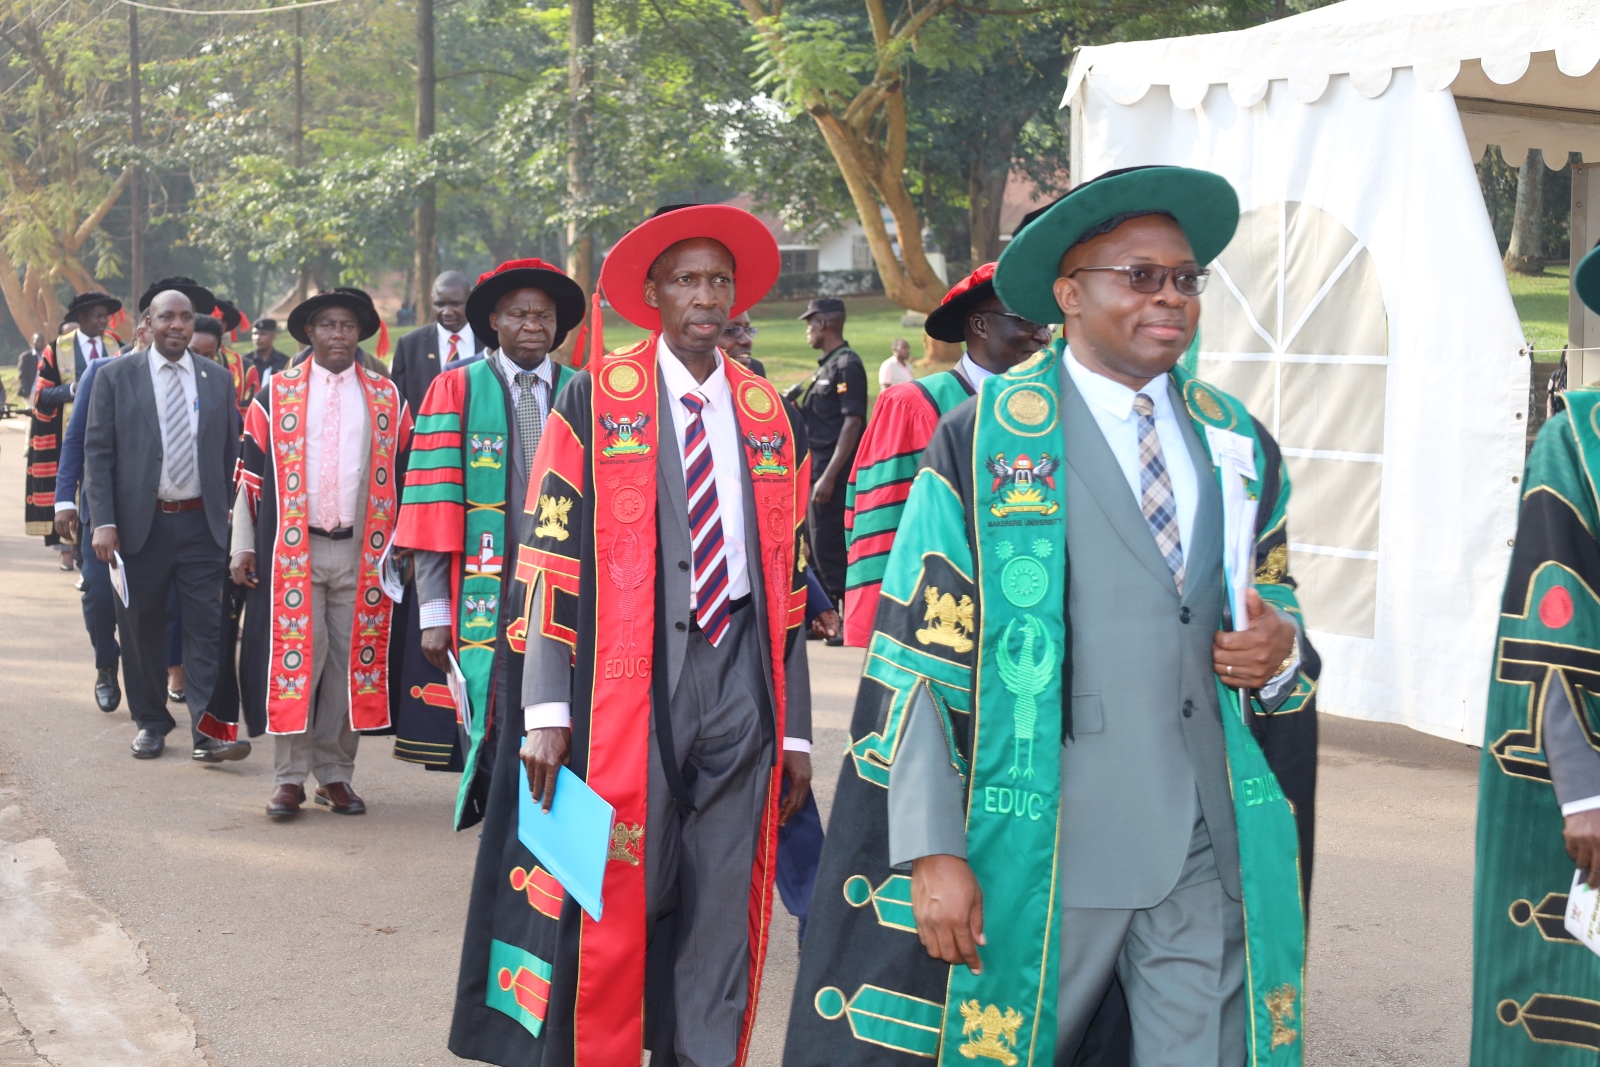 The Principal CEES, Prof. Anthony Muwagga Mugagga (2nd R) and Deputy Principal CEES, Prof. Ronald Bisaso in the Procession to the Freedom Square on Day 2 of the 73rd Graduation Ceremony on 14th February 2023, Makerere University.